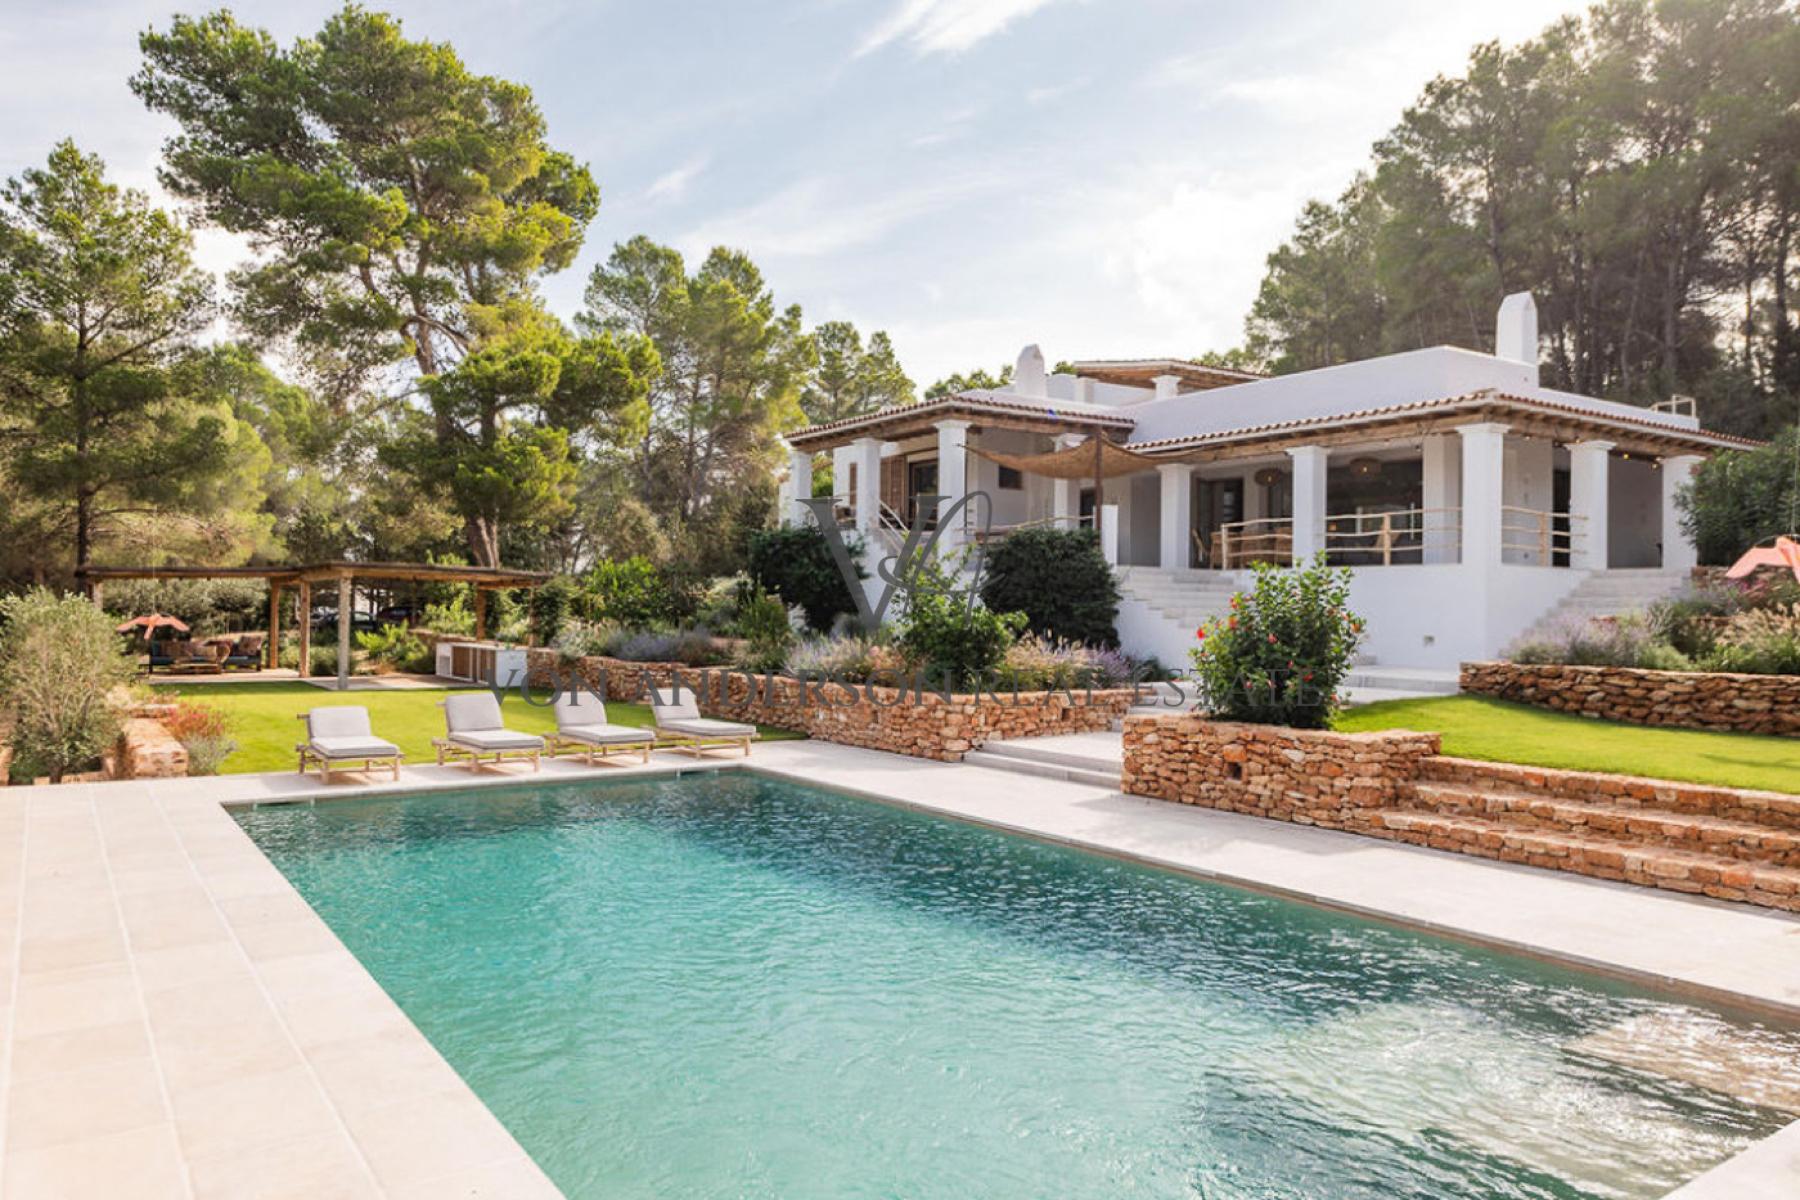 Exquisite Rural Villa in Peaceful Surroundings with Lovely Sea & Sunset Views, ref. VA1042, for sale in Ibiza by Von Anderson Real Estate